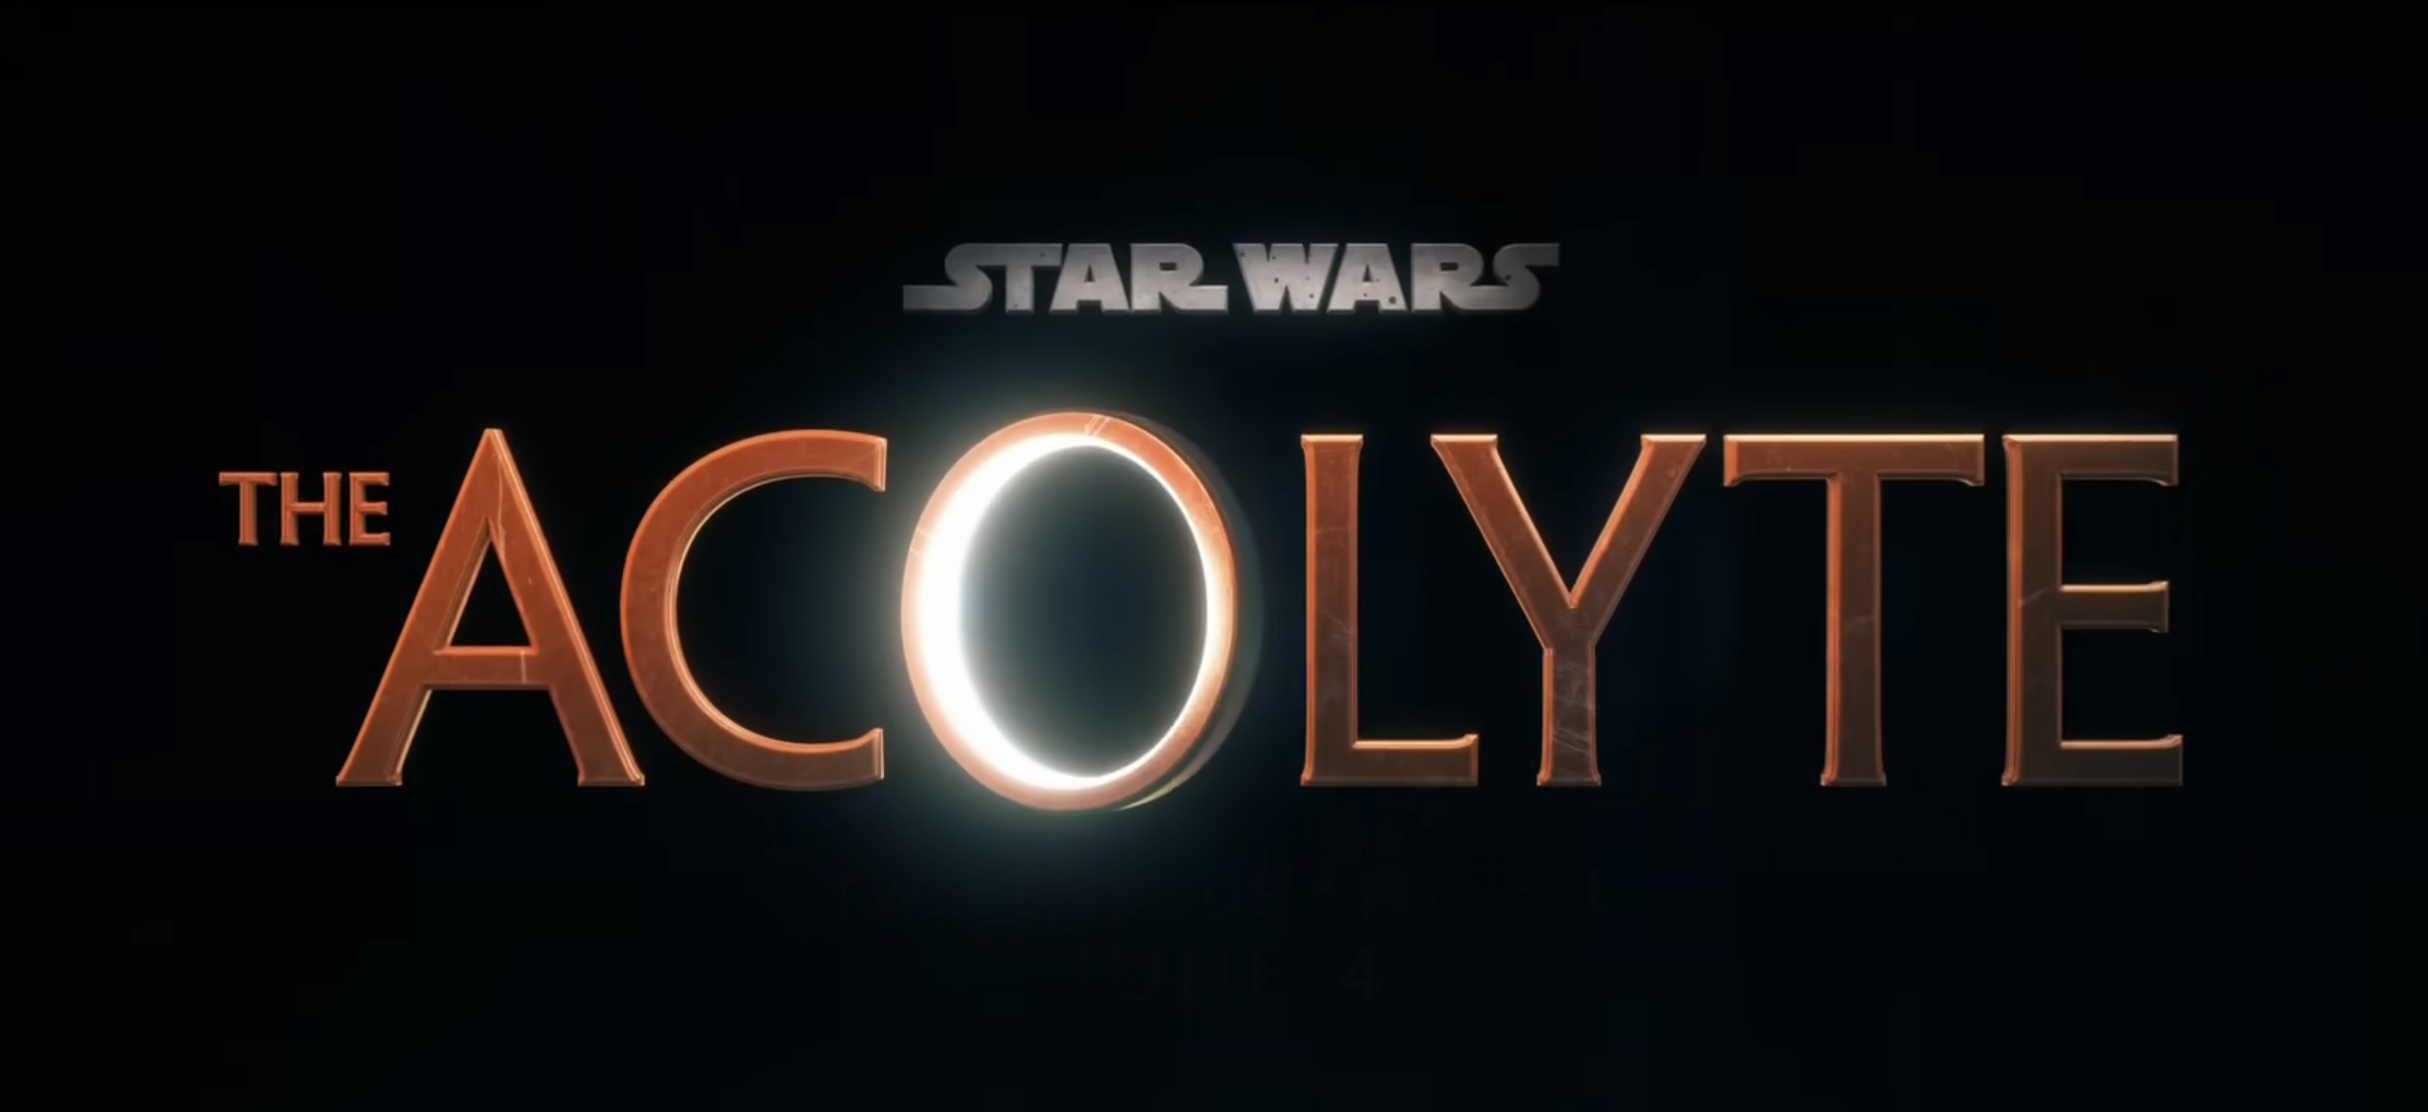 SEE IT: The First Trailer For ‘The Acolyte’ Is Here!